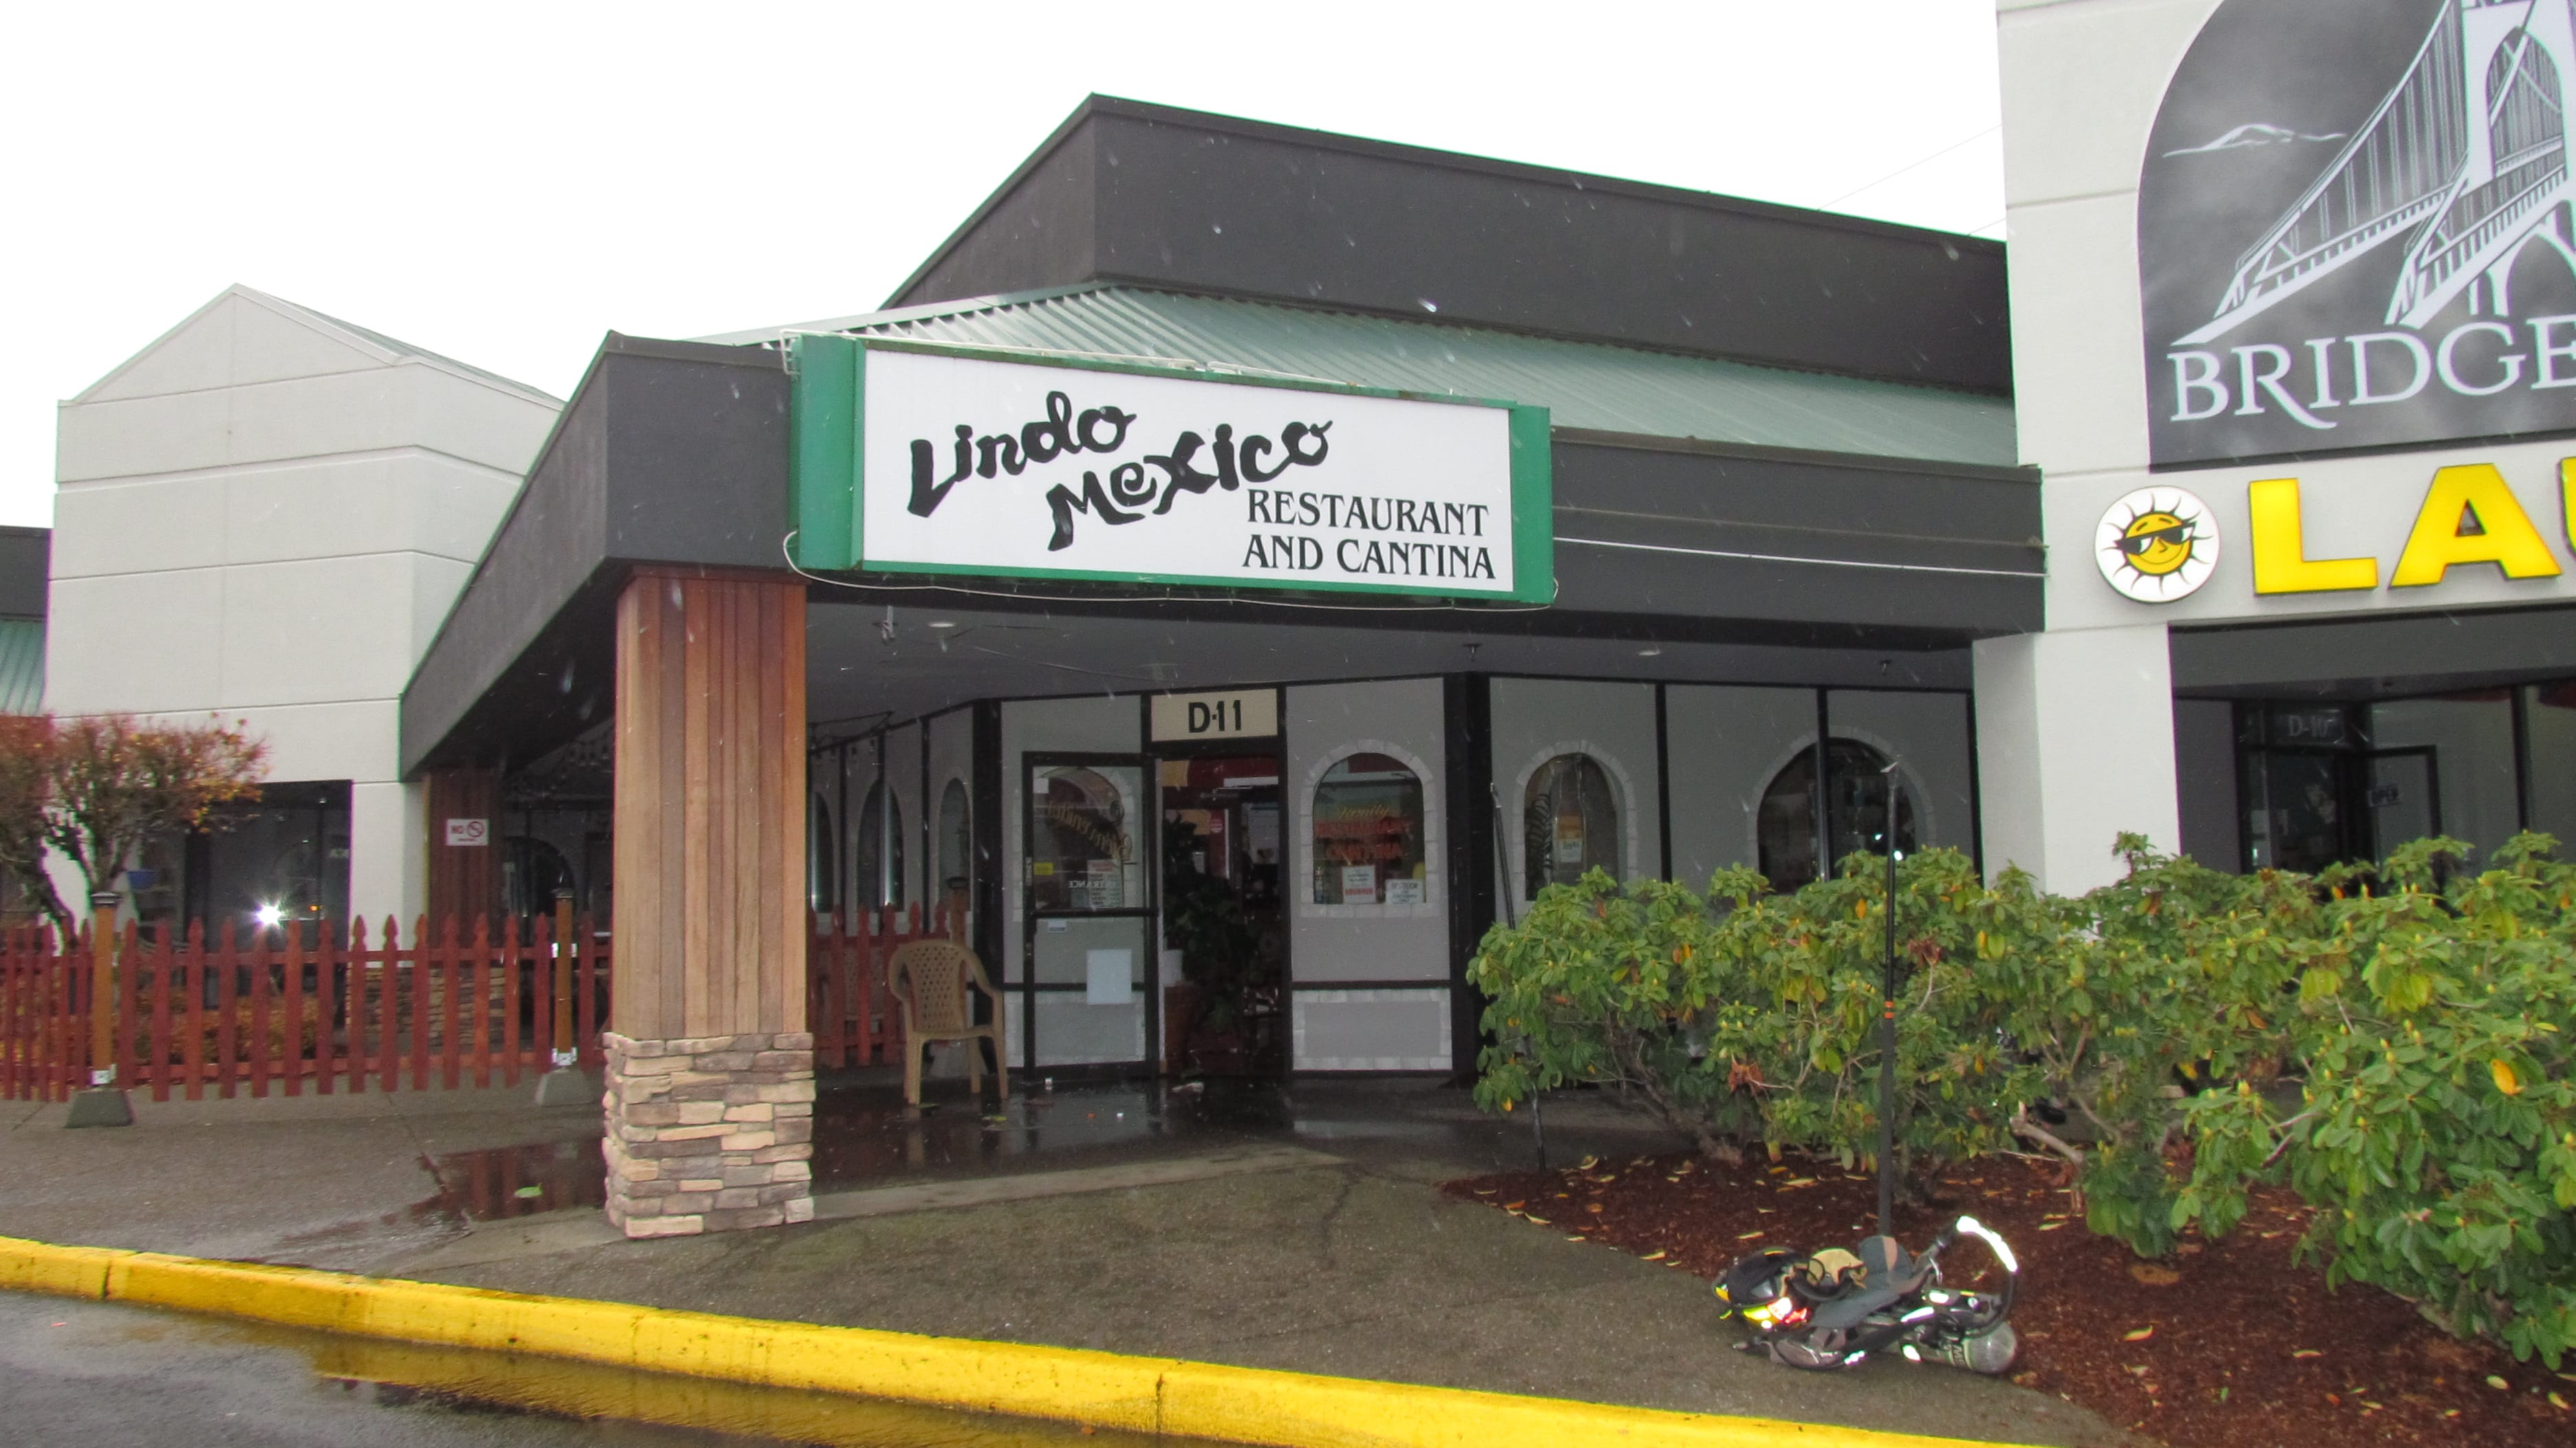 Firefighters were dispatched Wednesday morning to a commercial fire at Lindo Mexico in east Vancouver. A sprinkler system prevented the fire from spreading to other suites at the Bridgeport Retail Center.